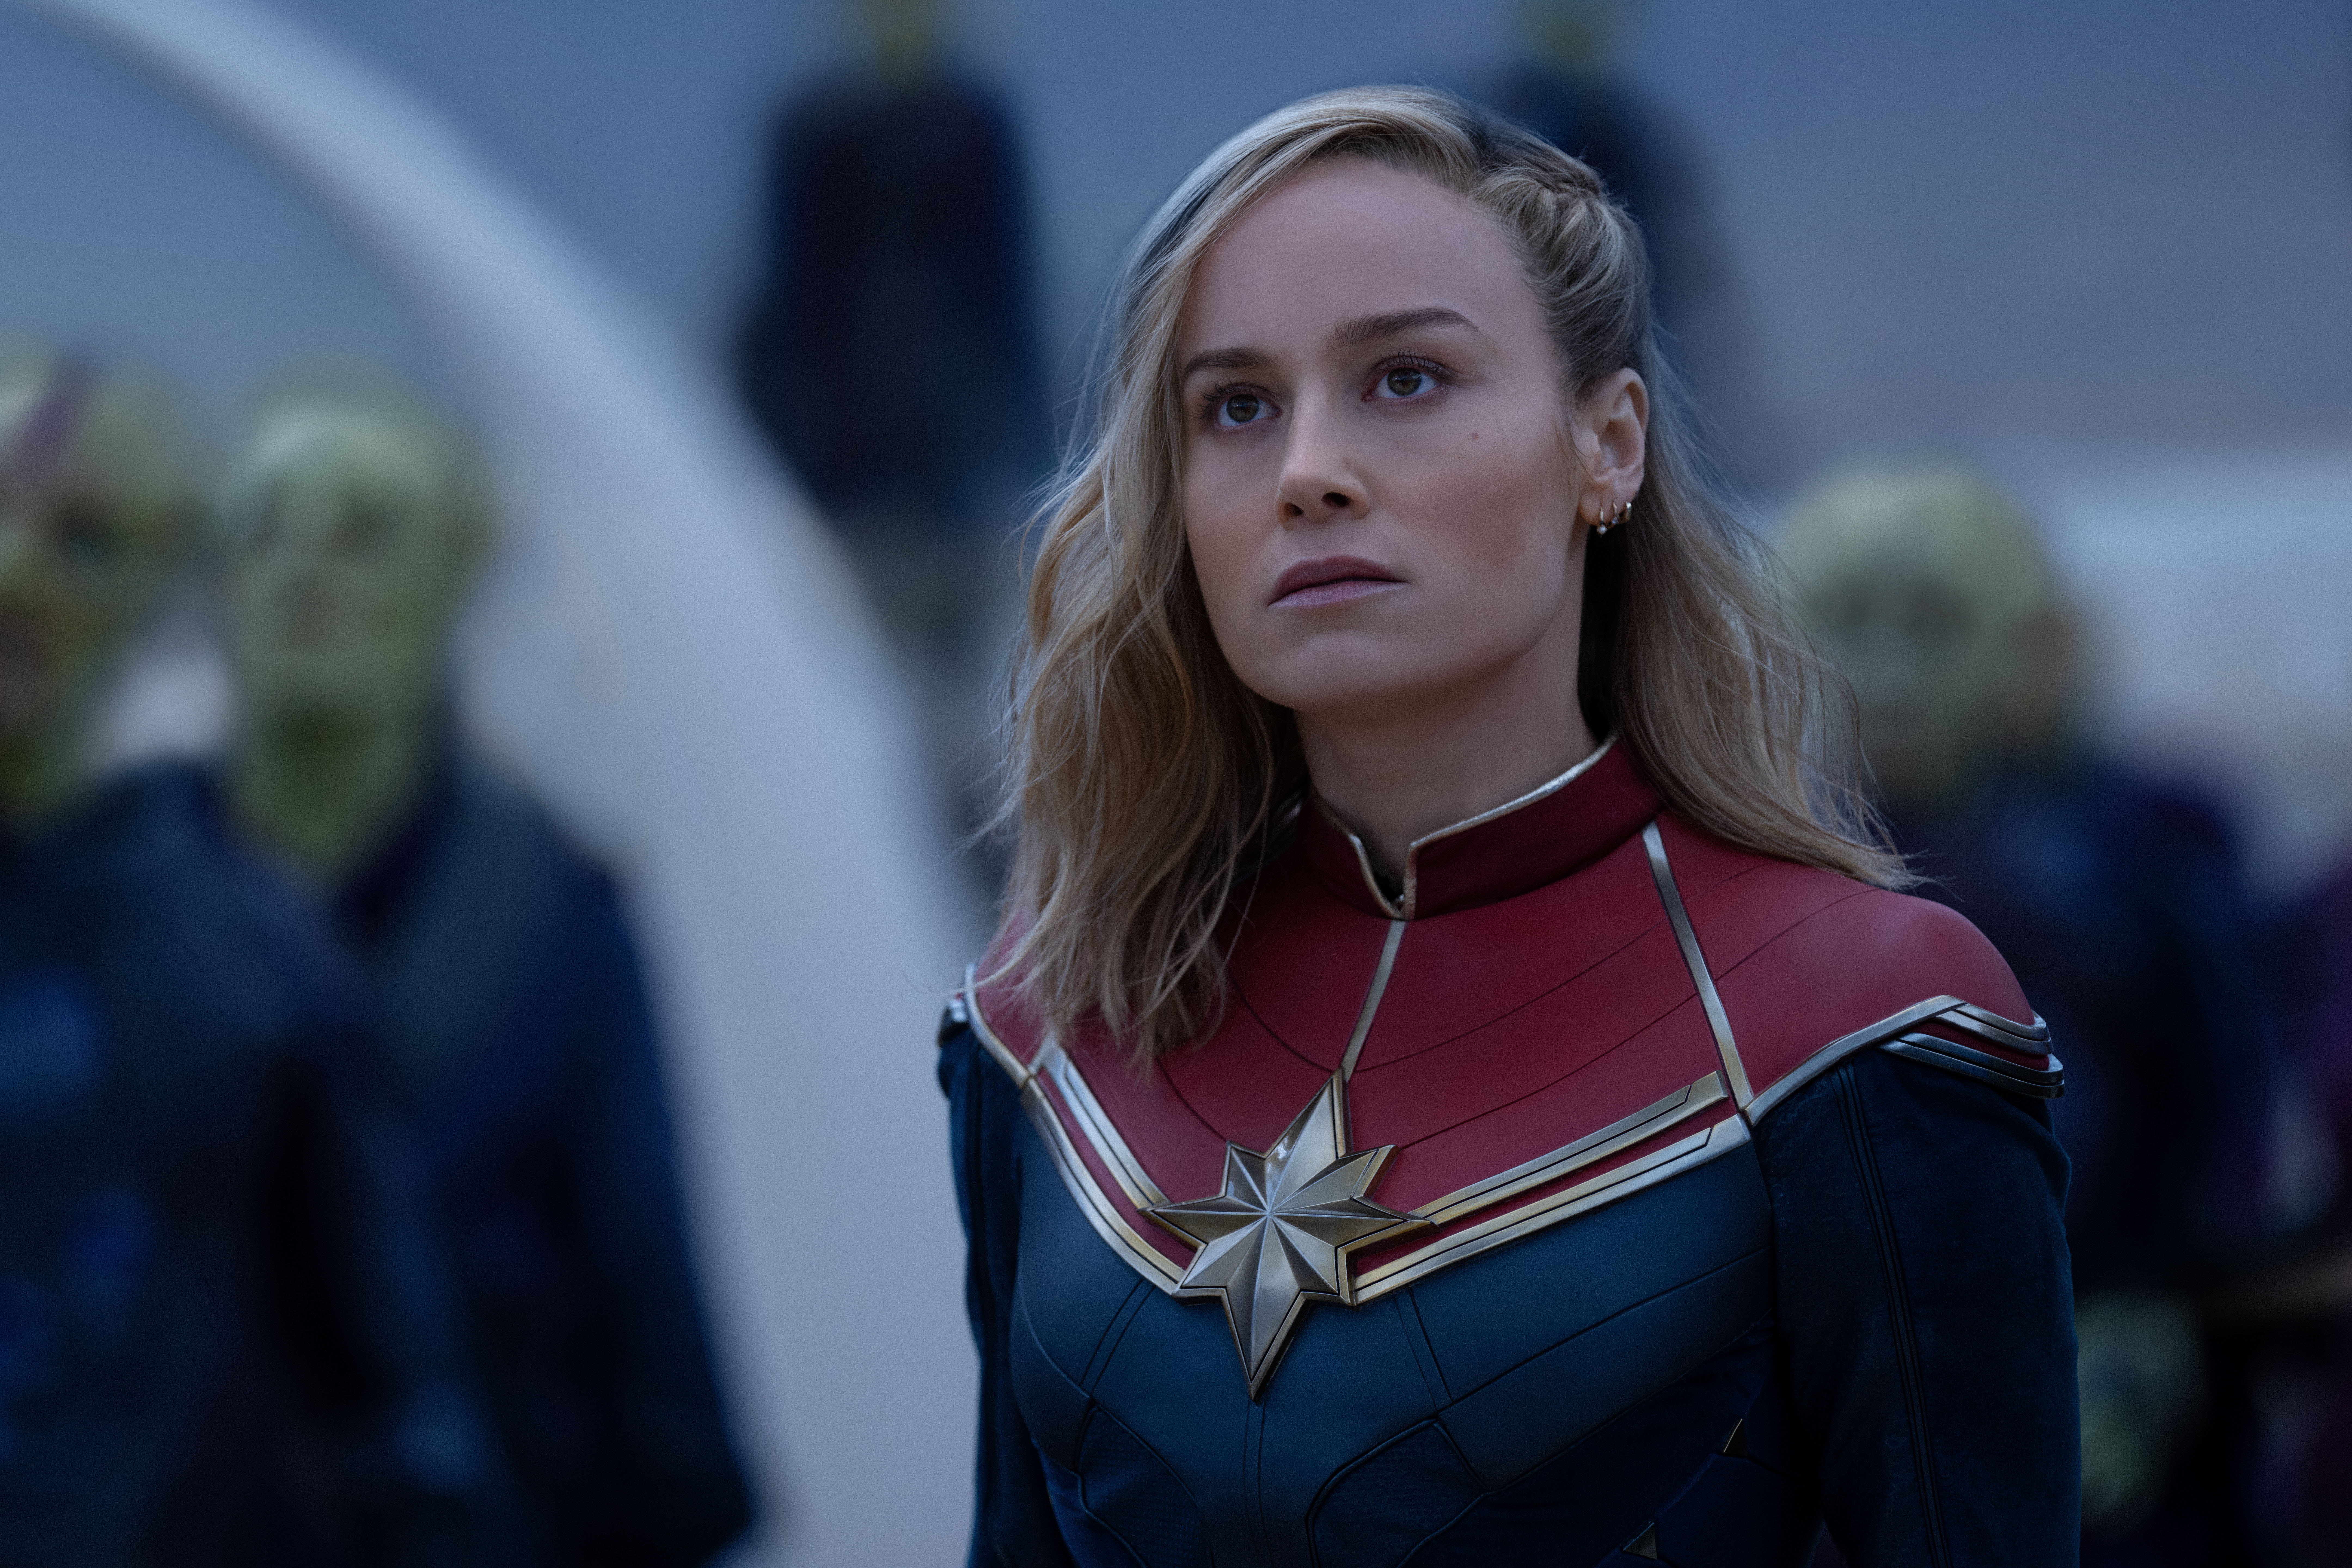 Captain Marvel 2 Gets A Revealing New Title